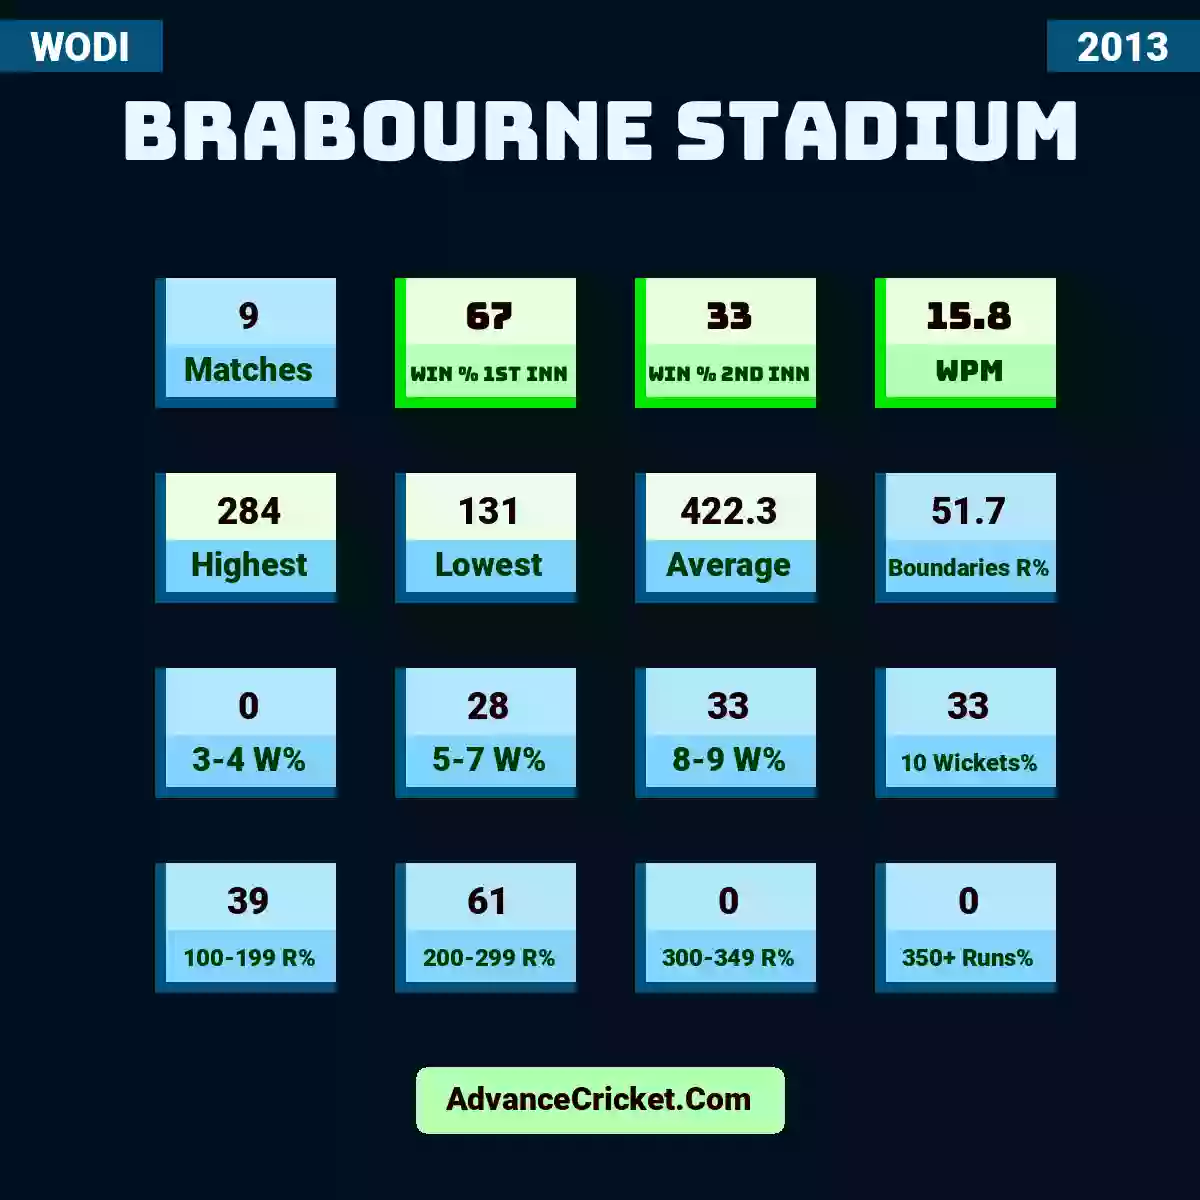 Image showing Brabourne Stadium with Matches: 9, Win % 1st Inn: 67, Win % 2nd Inn: 33, WPM: 15.8, Highest: 284, Lowest: 131, Average: 422.3, Boundaries R%: 51.7, 3-4 W%: 0, 5-7 W%: 28, 8-9 W%: 33, 10 Wickets%: 33, 100-199 R%: 39, 200-299 R%: 61, 300-349 R%: 0, 350+ Runs%: 0.